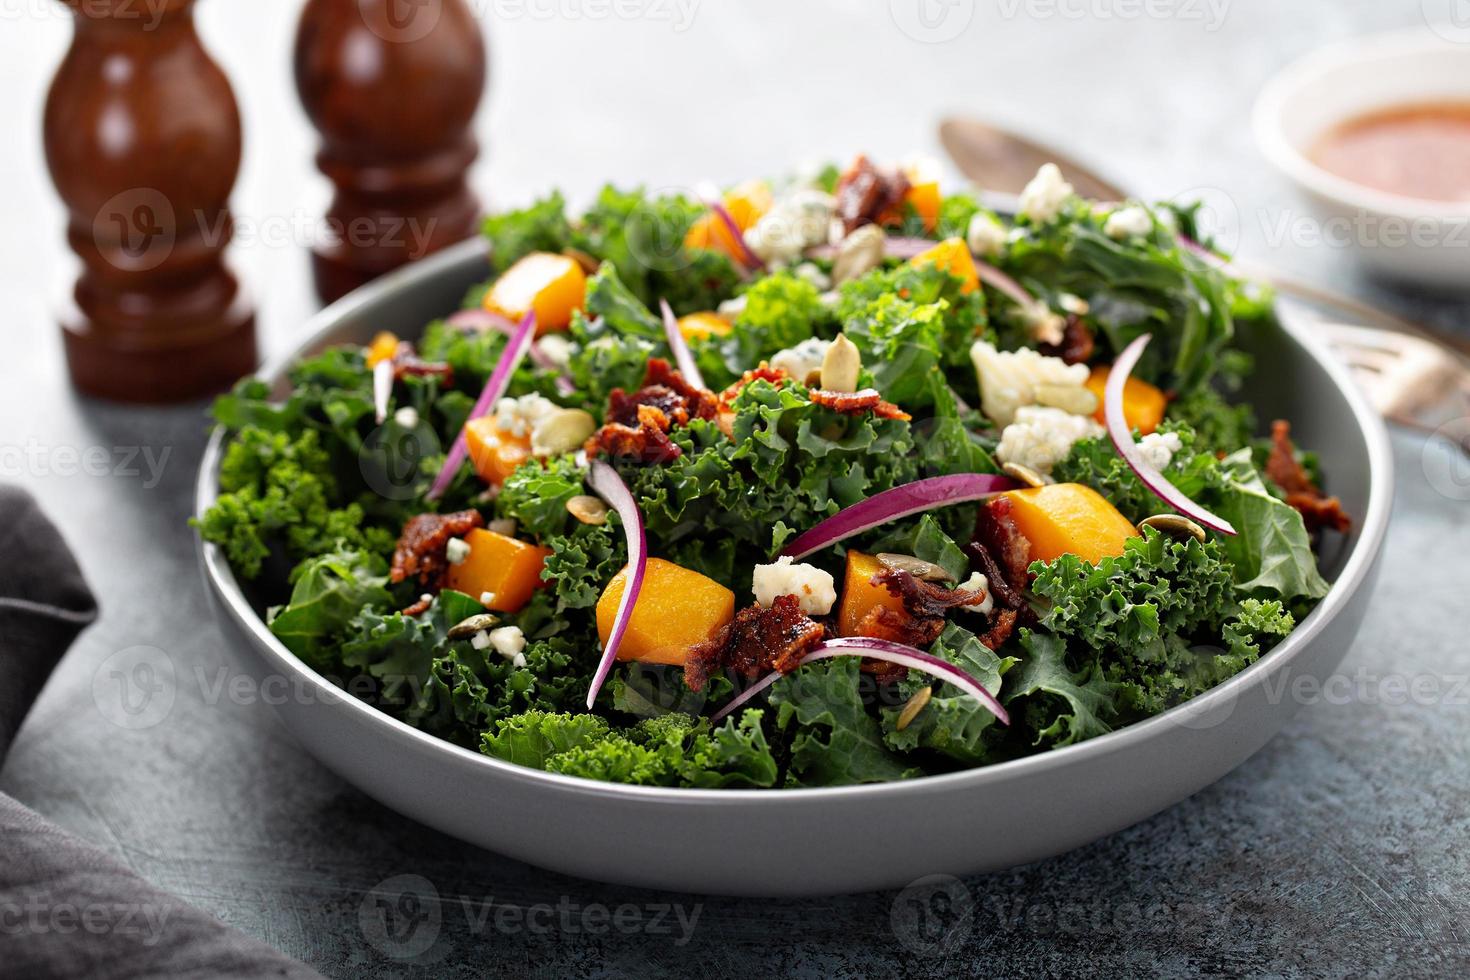 Fall salad with kale and butternut squash photo